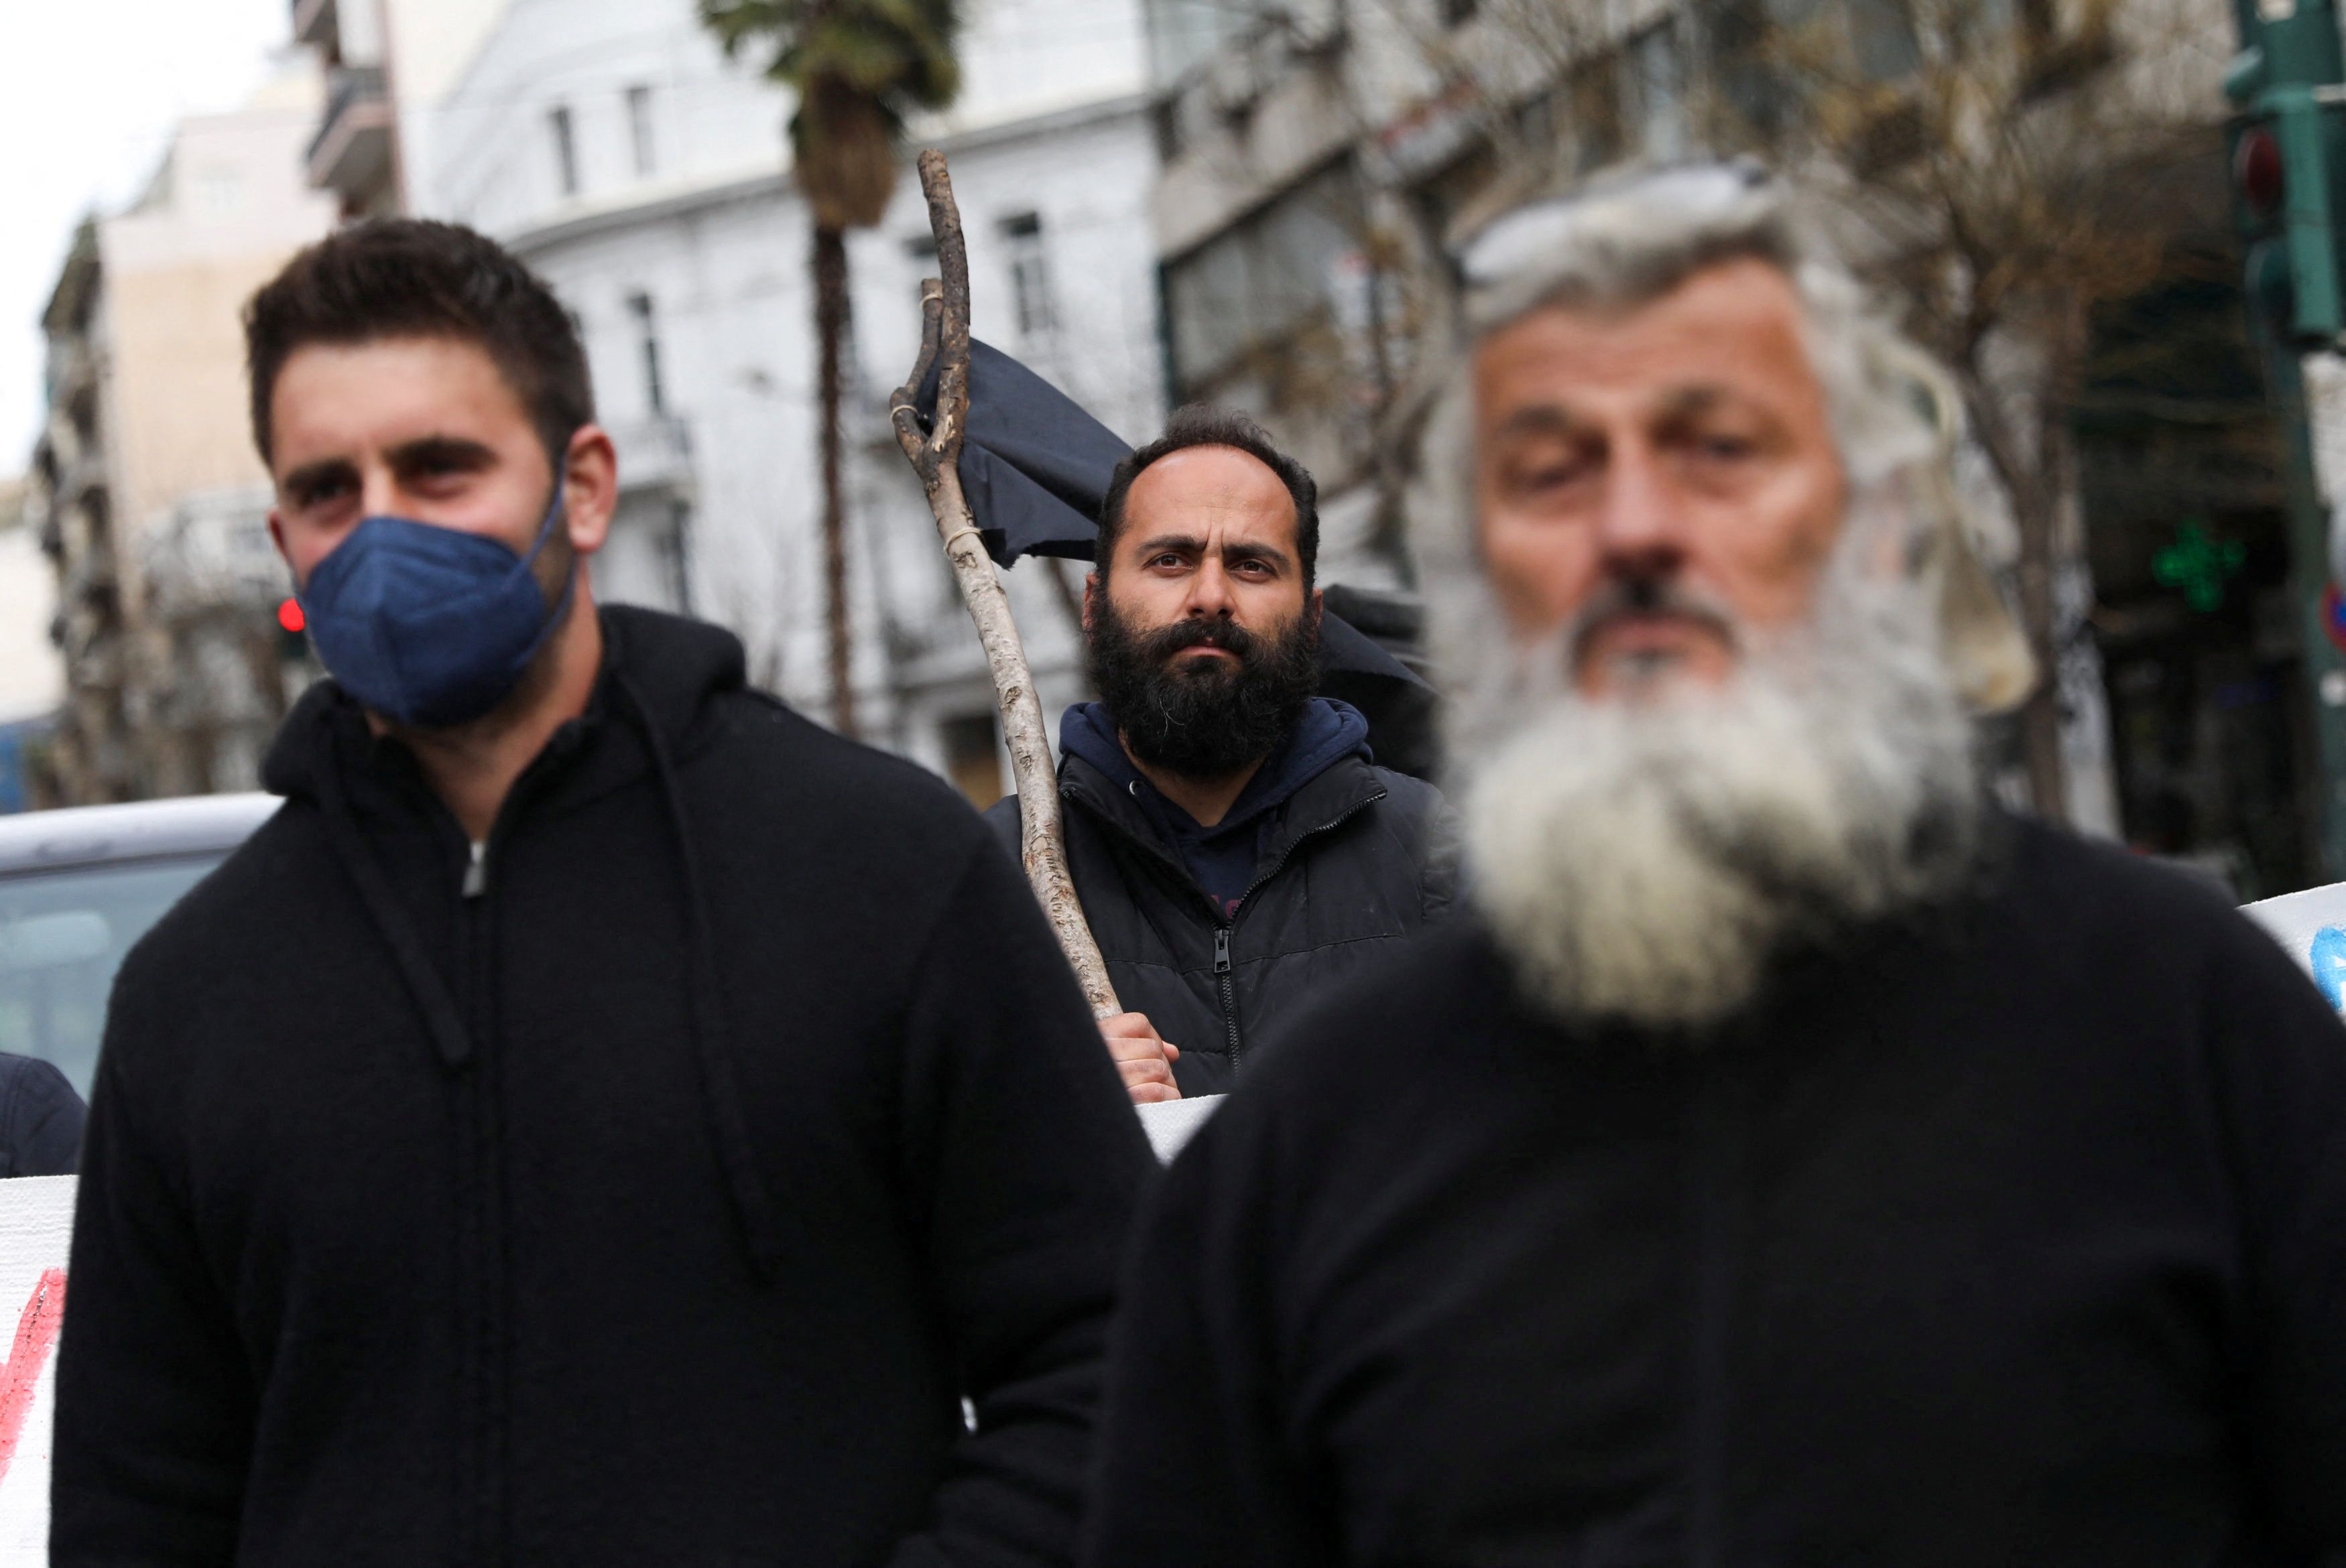 Greek farmers demonstrate against fuel and fertilizer costs, in Athens